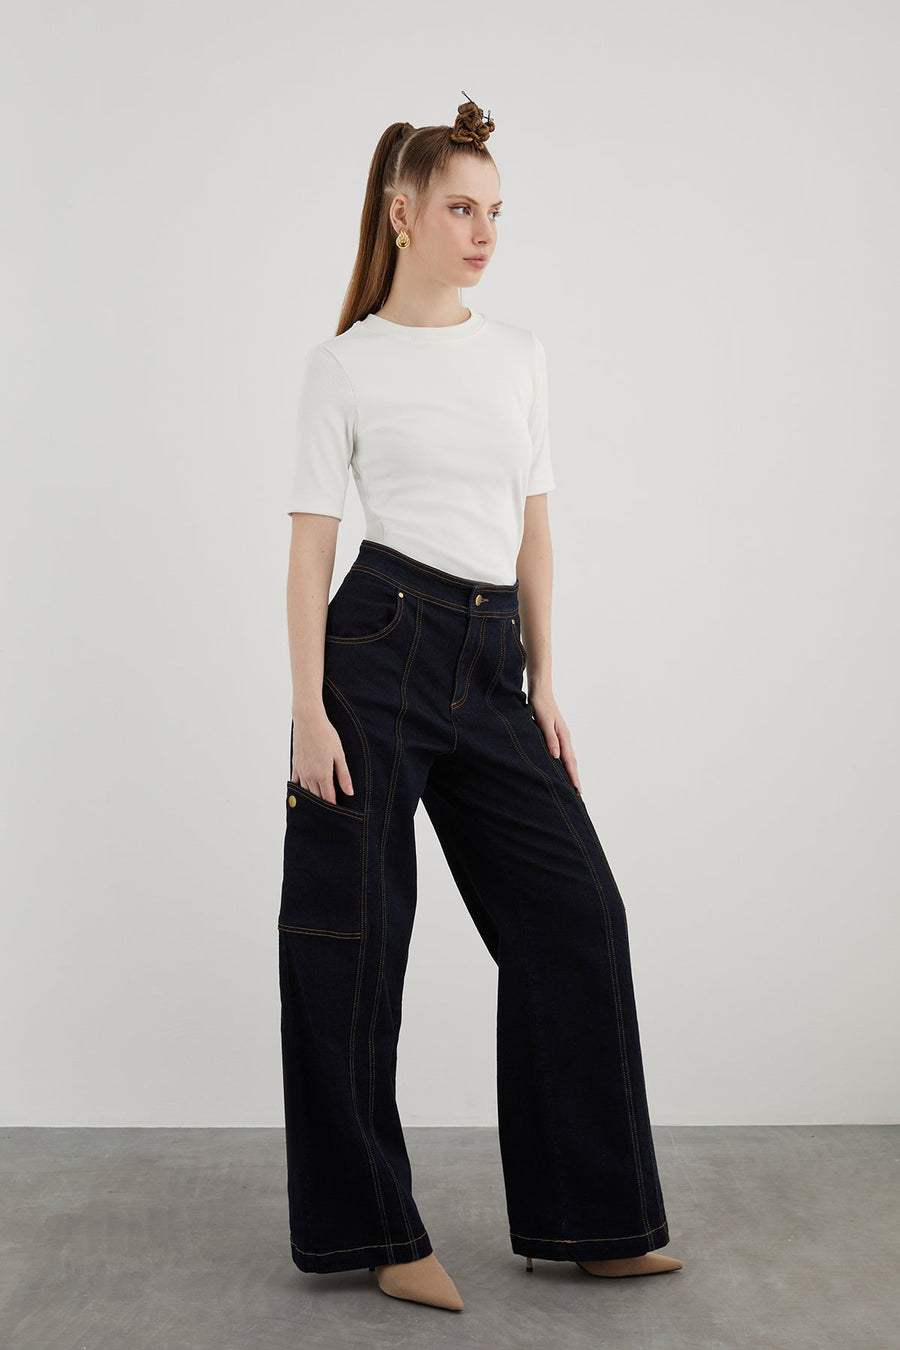 Cargo Jean Pants With Contrast Stitching Detail | Porterist